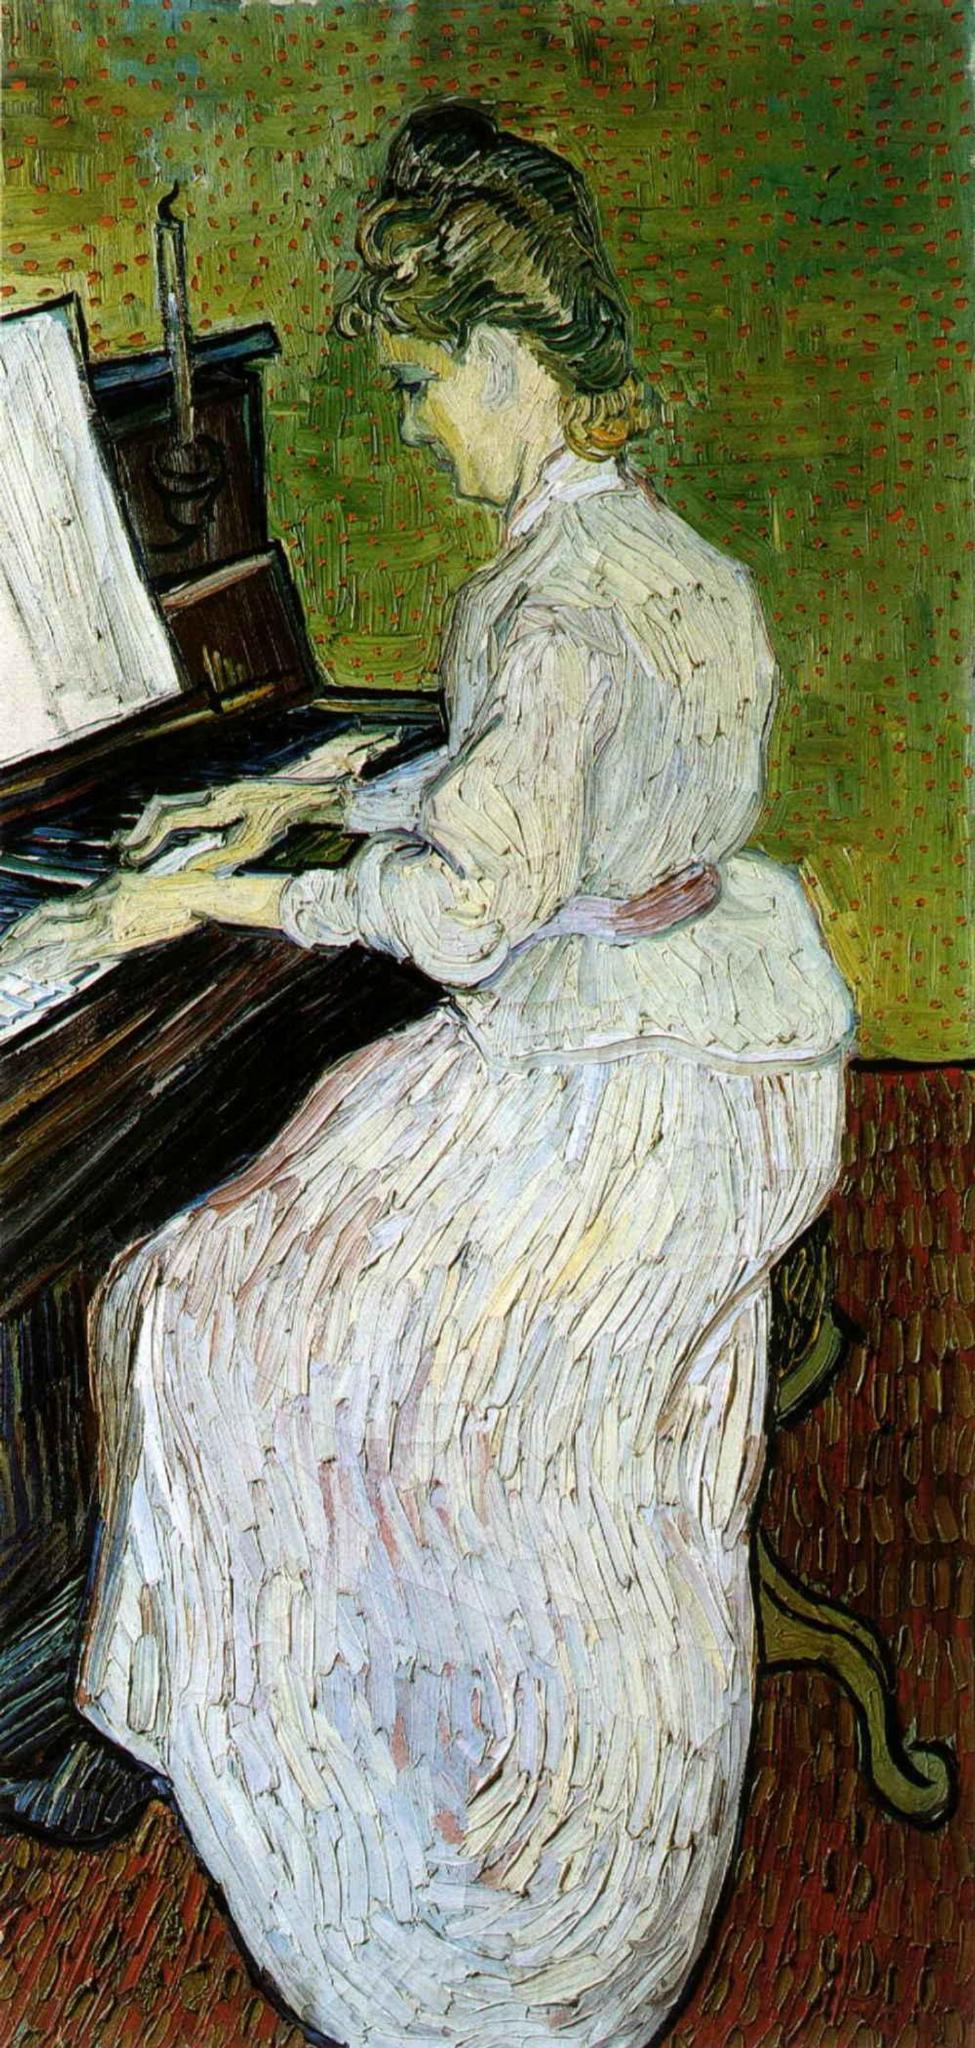 Marguerite Gachet at the Piano